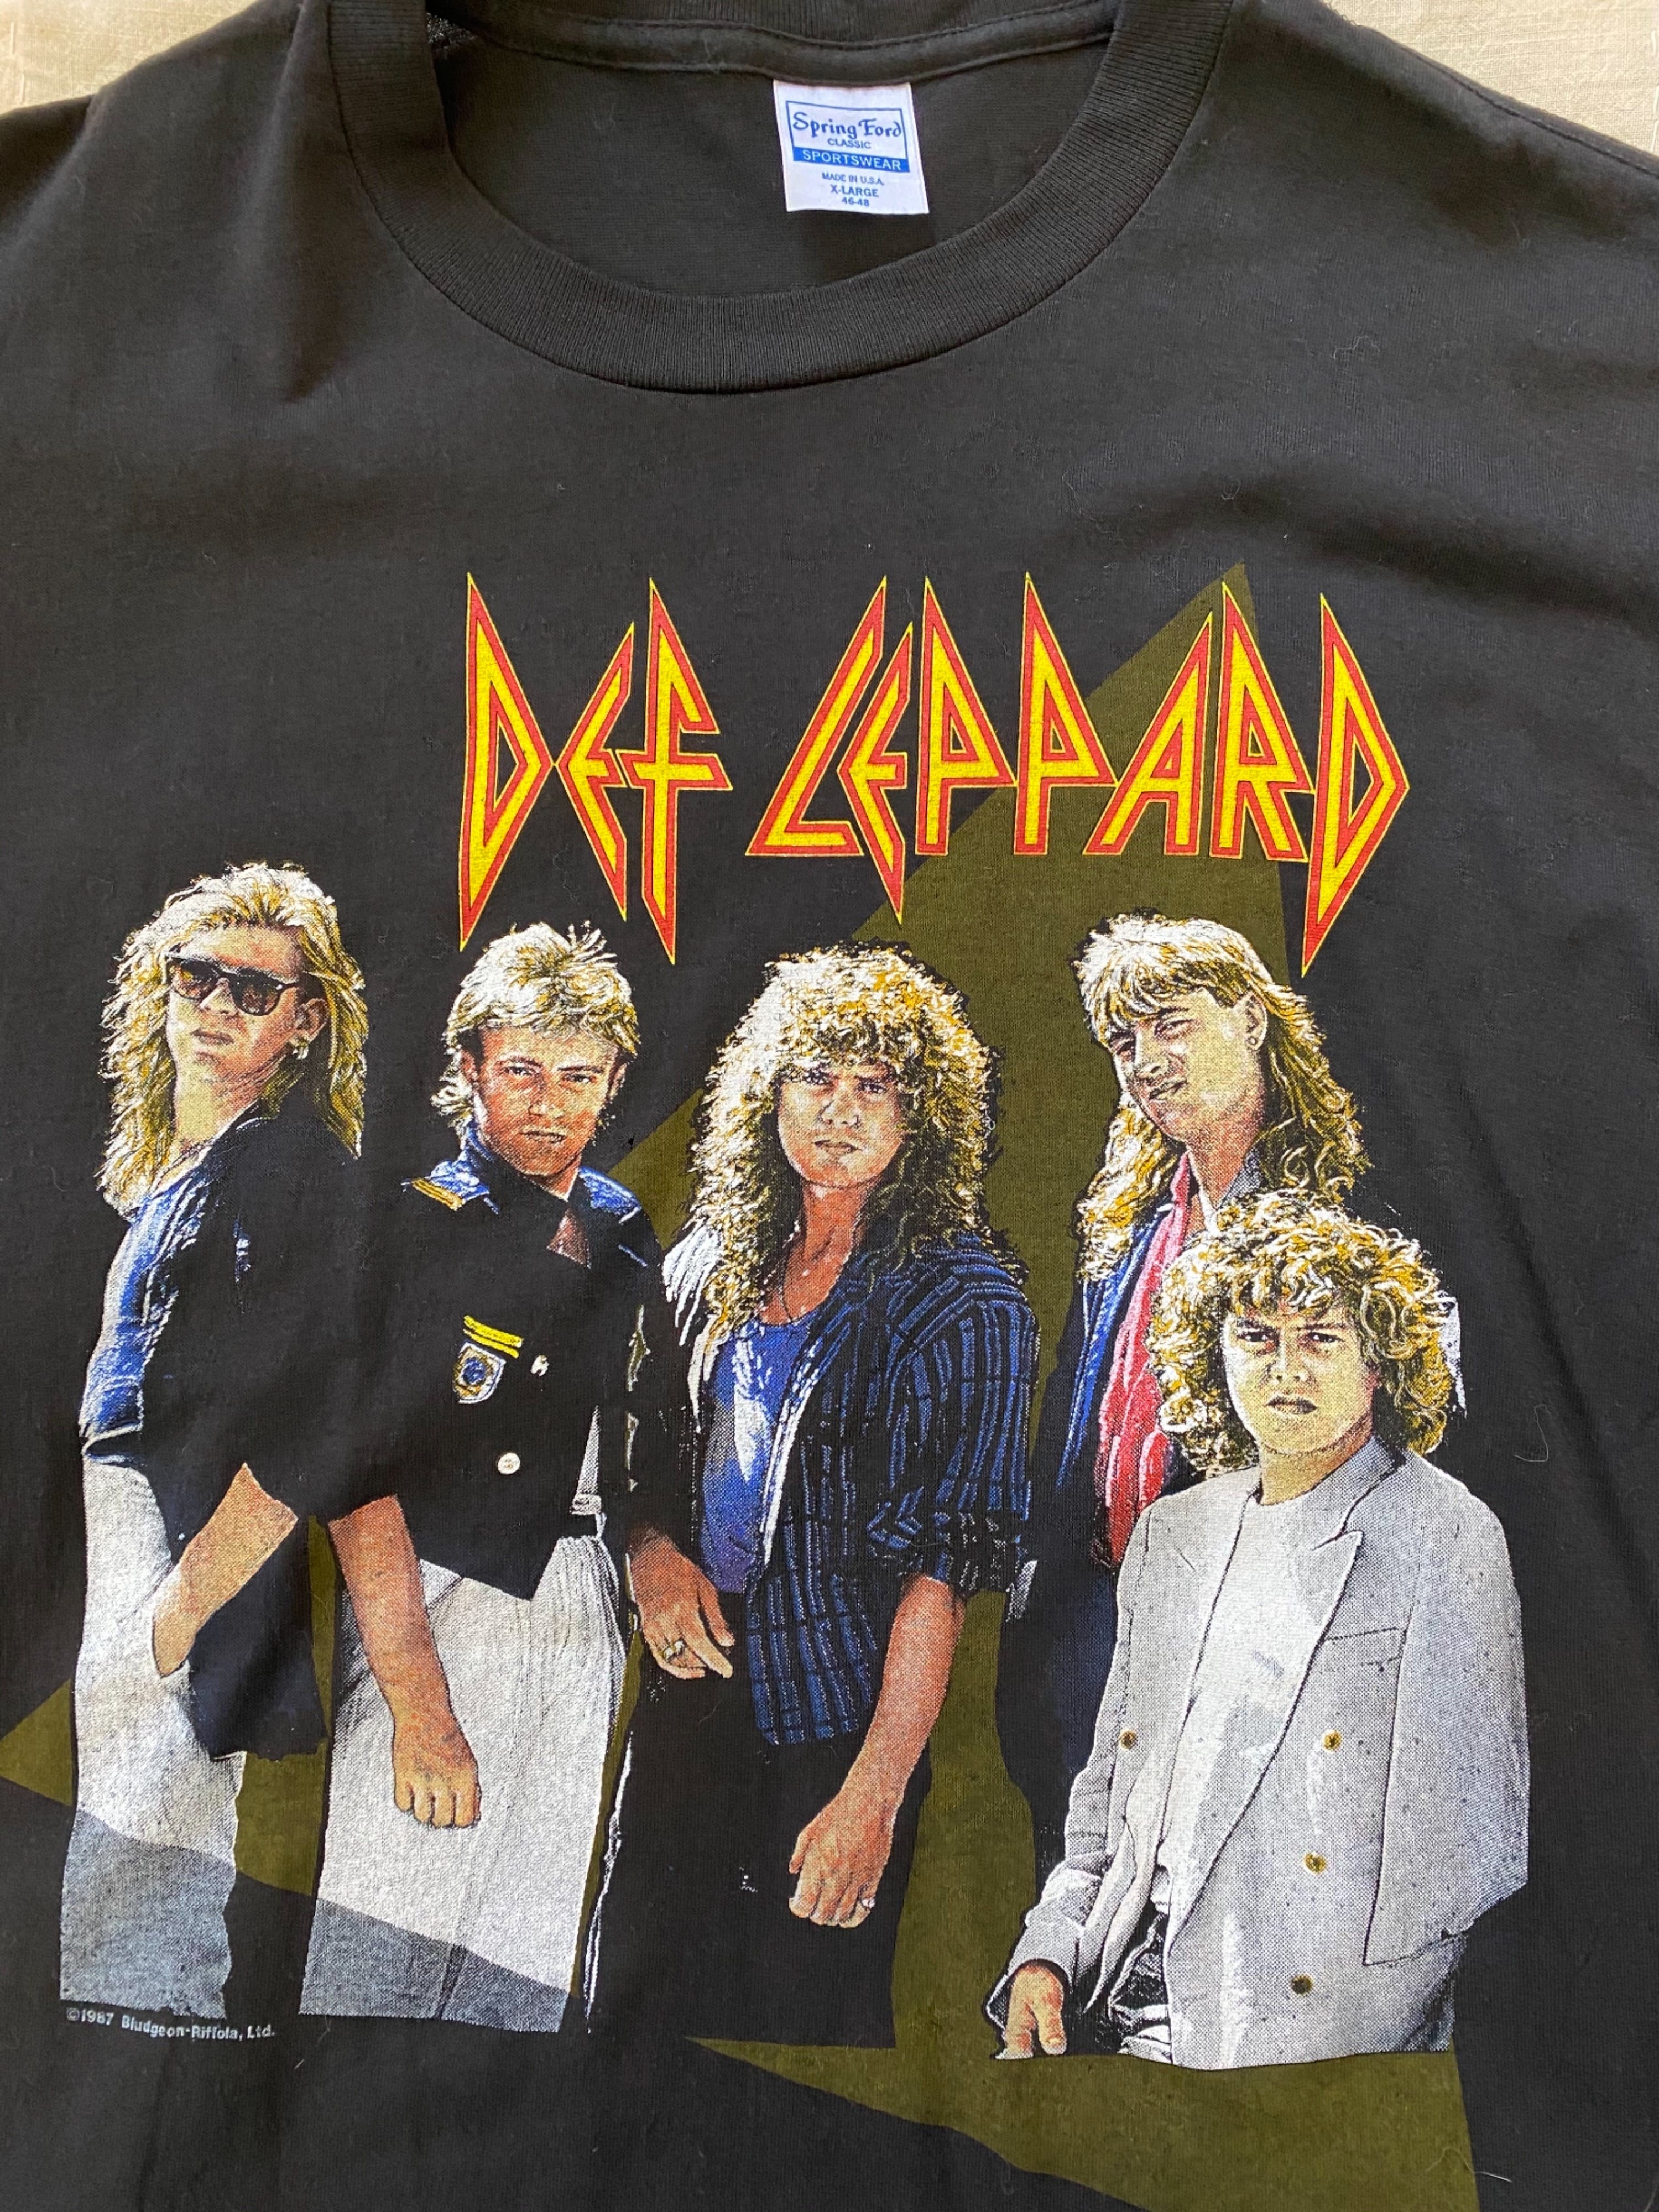 Vintage 80’s Def Leppard Hysteria T-Shirt by Spring Ford | Shop THRILLING